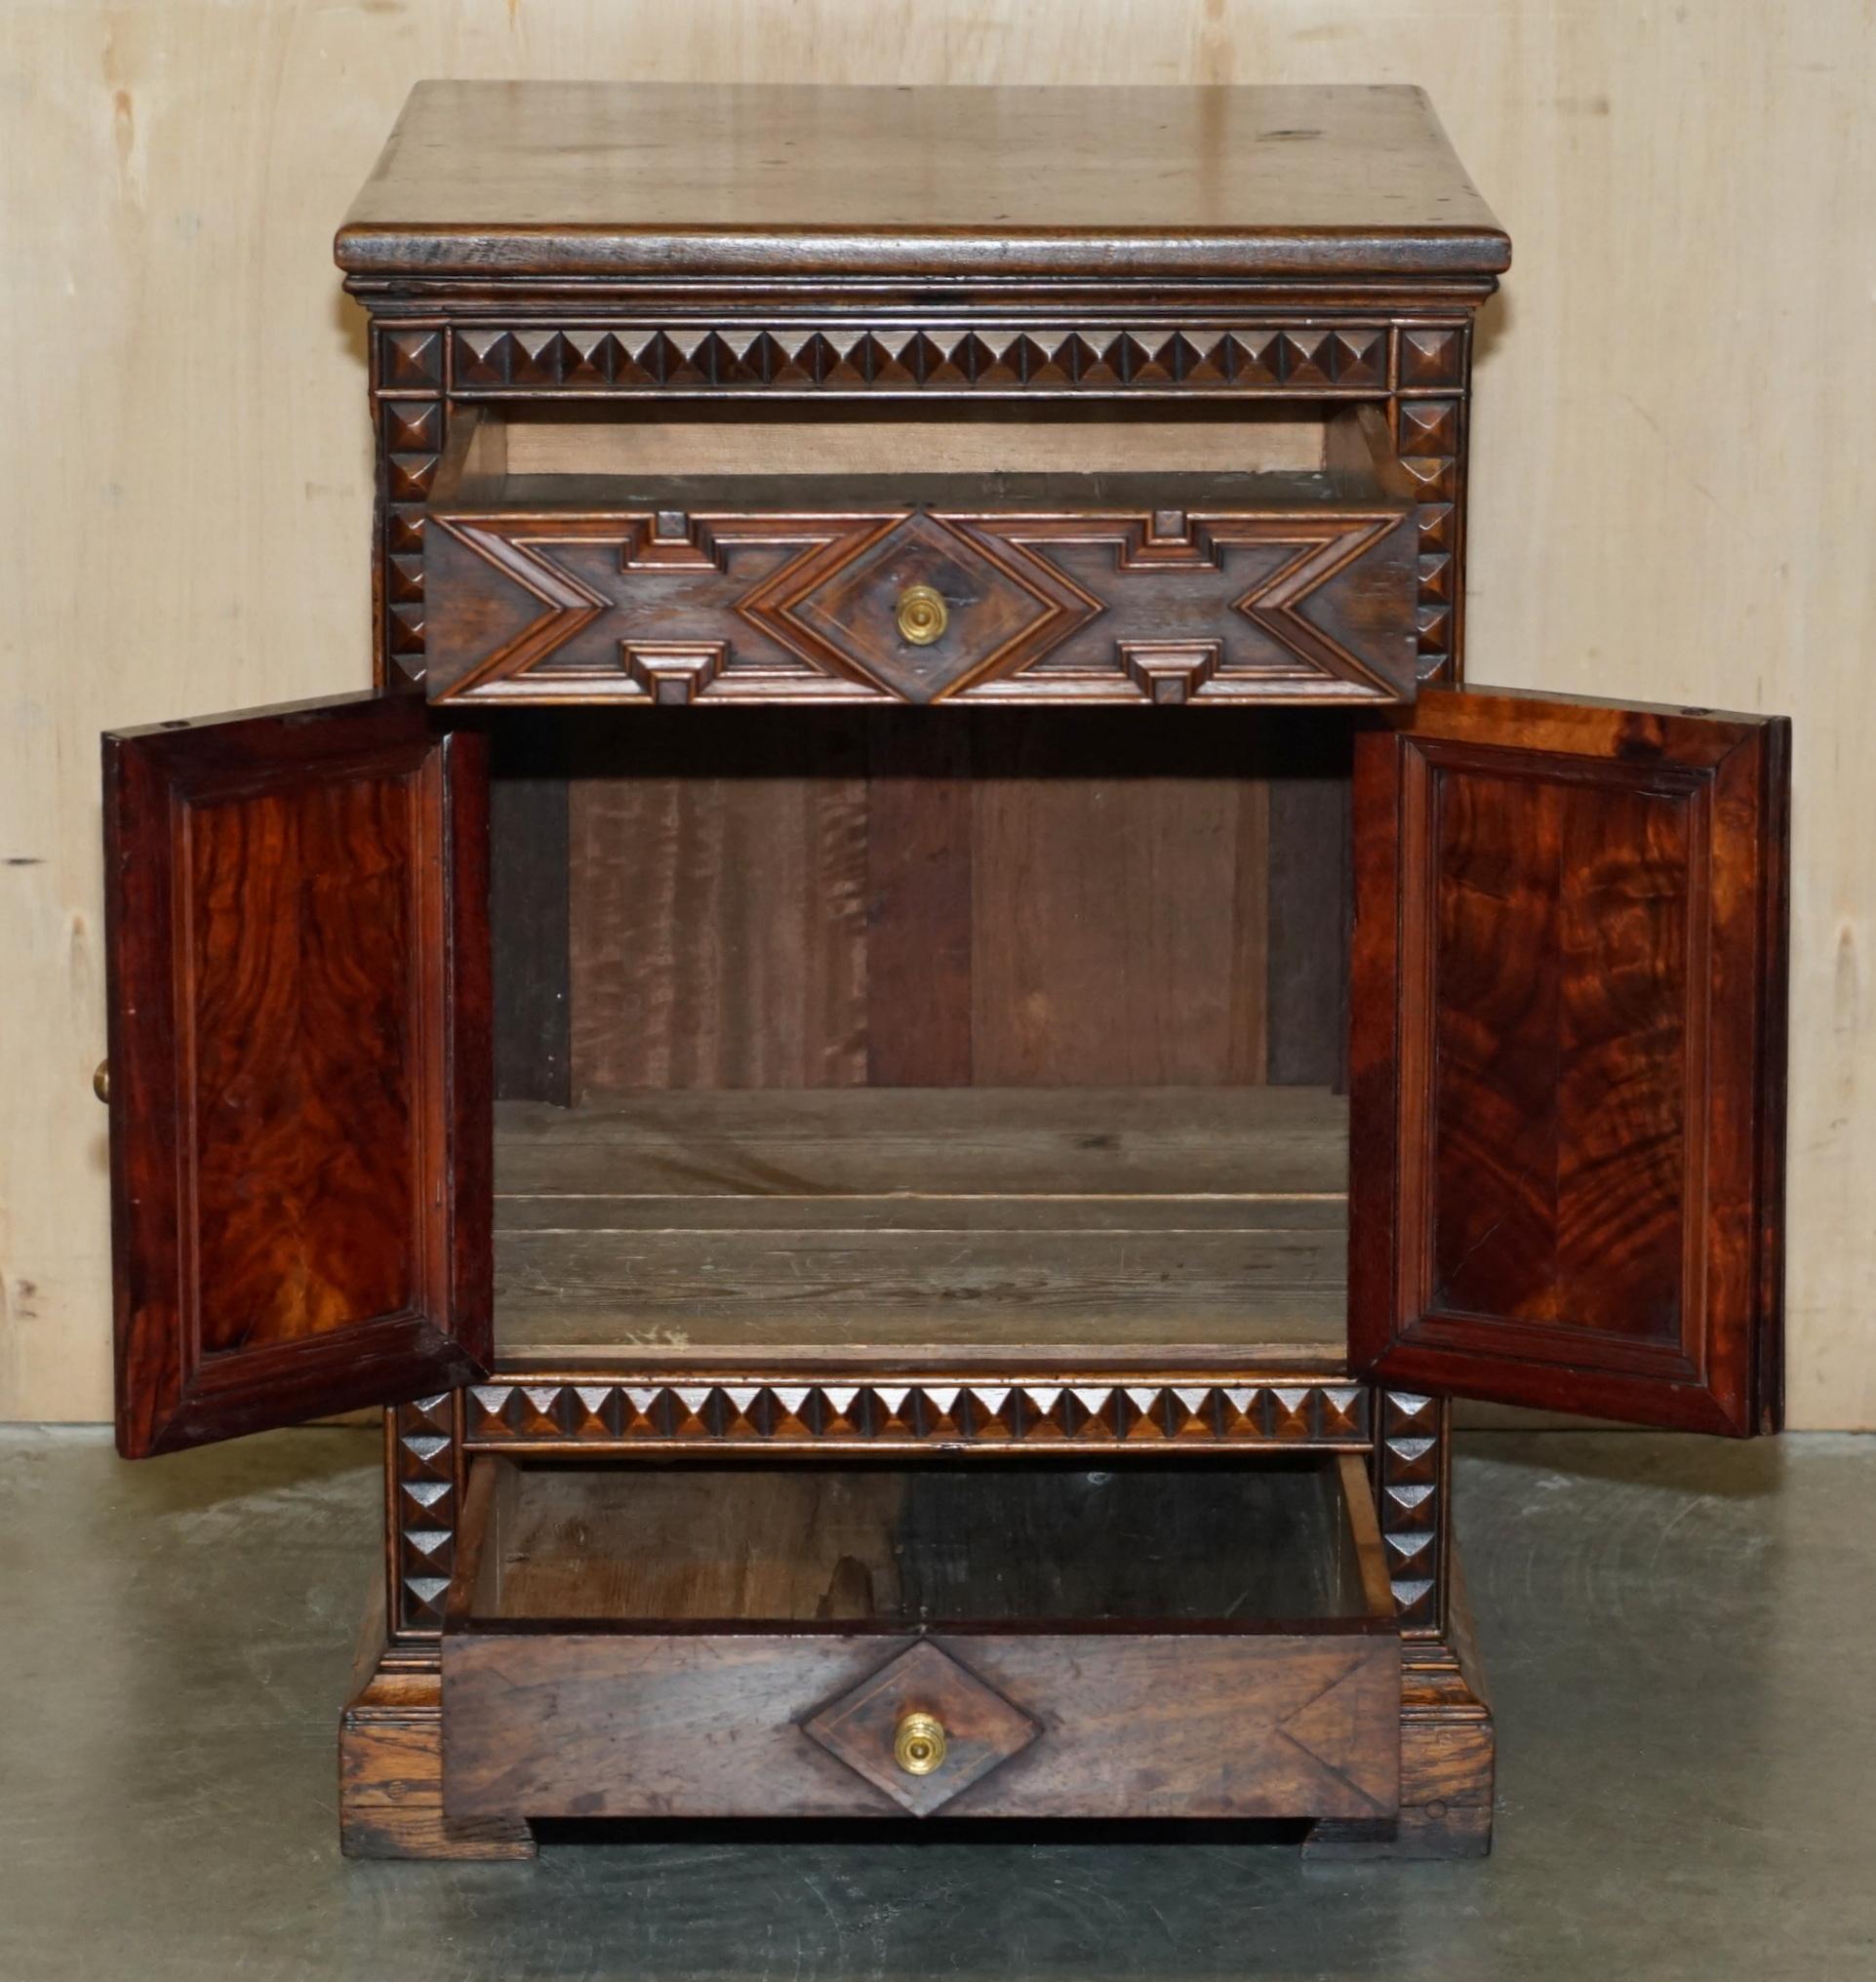 LOVELY FULLY RESTORED ANTIQUE JACOBEAN REVIVAL HAND CARVED SIDEBOARD CUPBOARD CUPBOARDs im Angebot 11